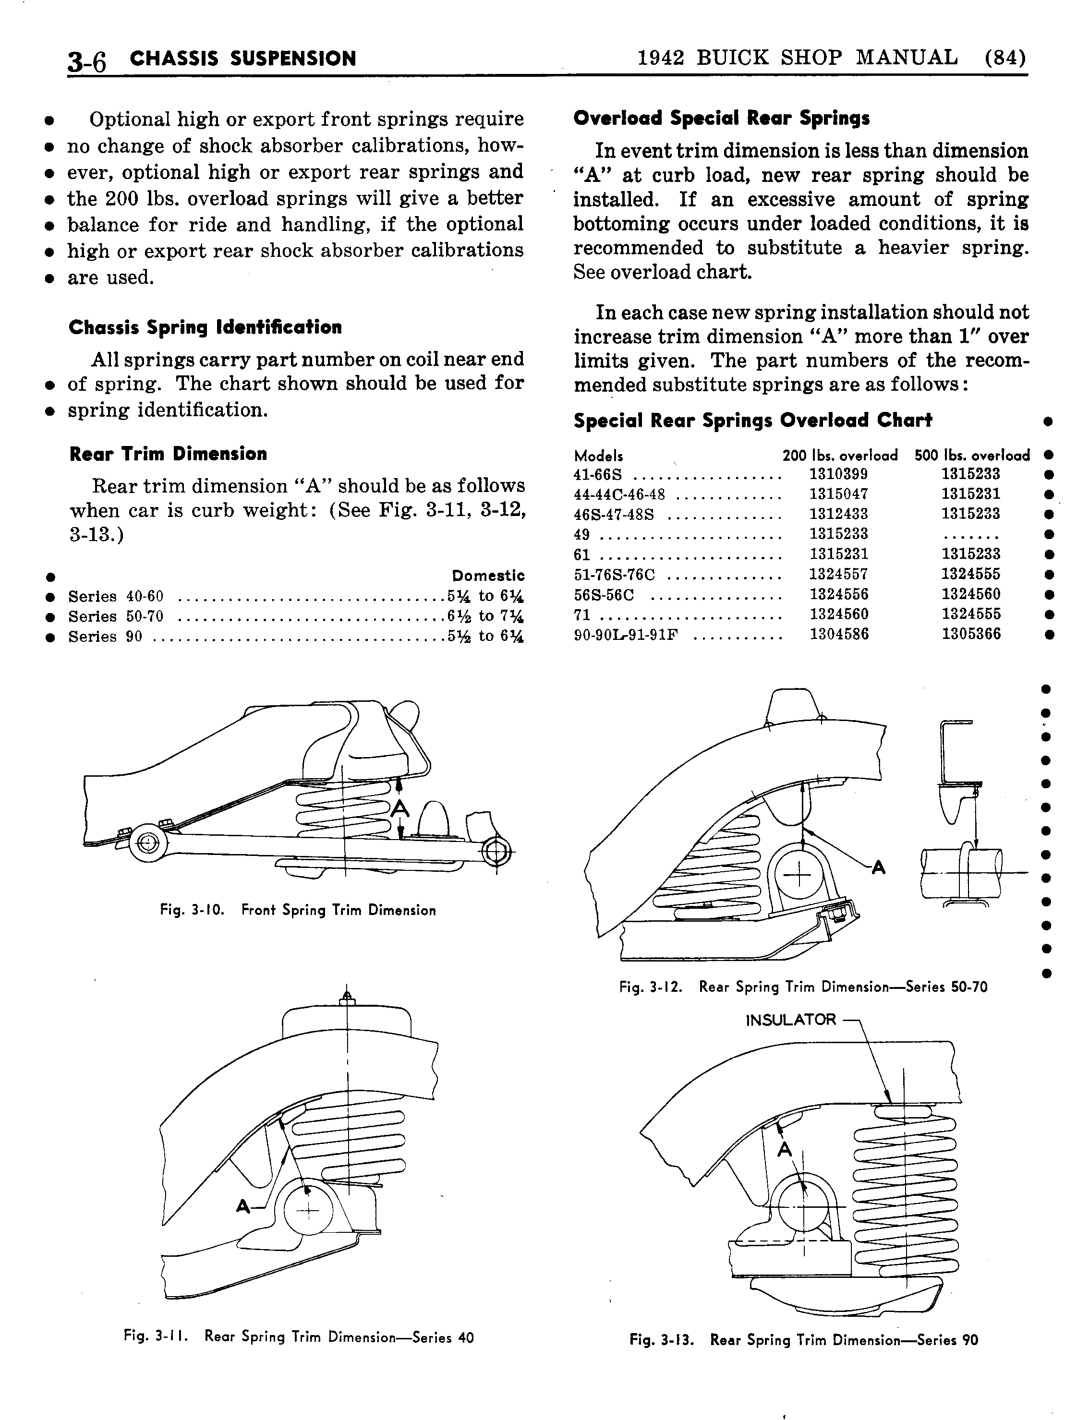 n_04 1942 Buick Shop Manual - Chassis Suspension-006-006.jpg